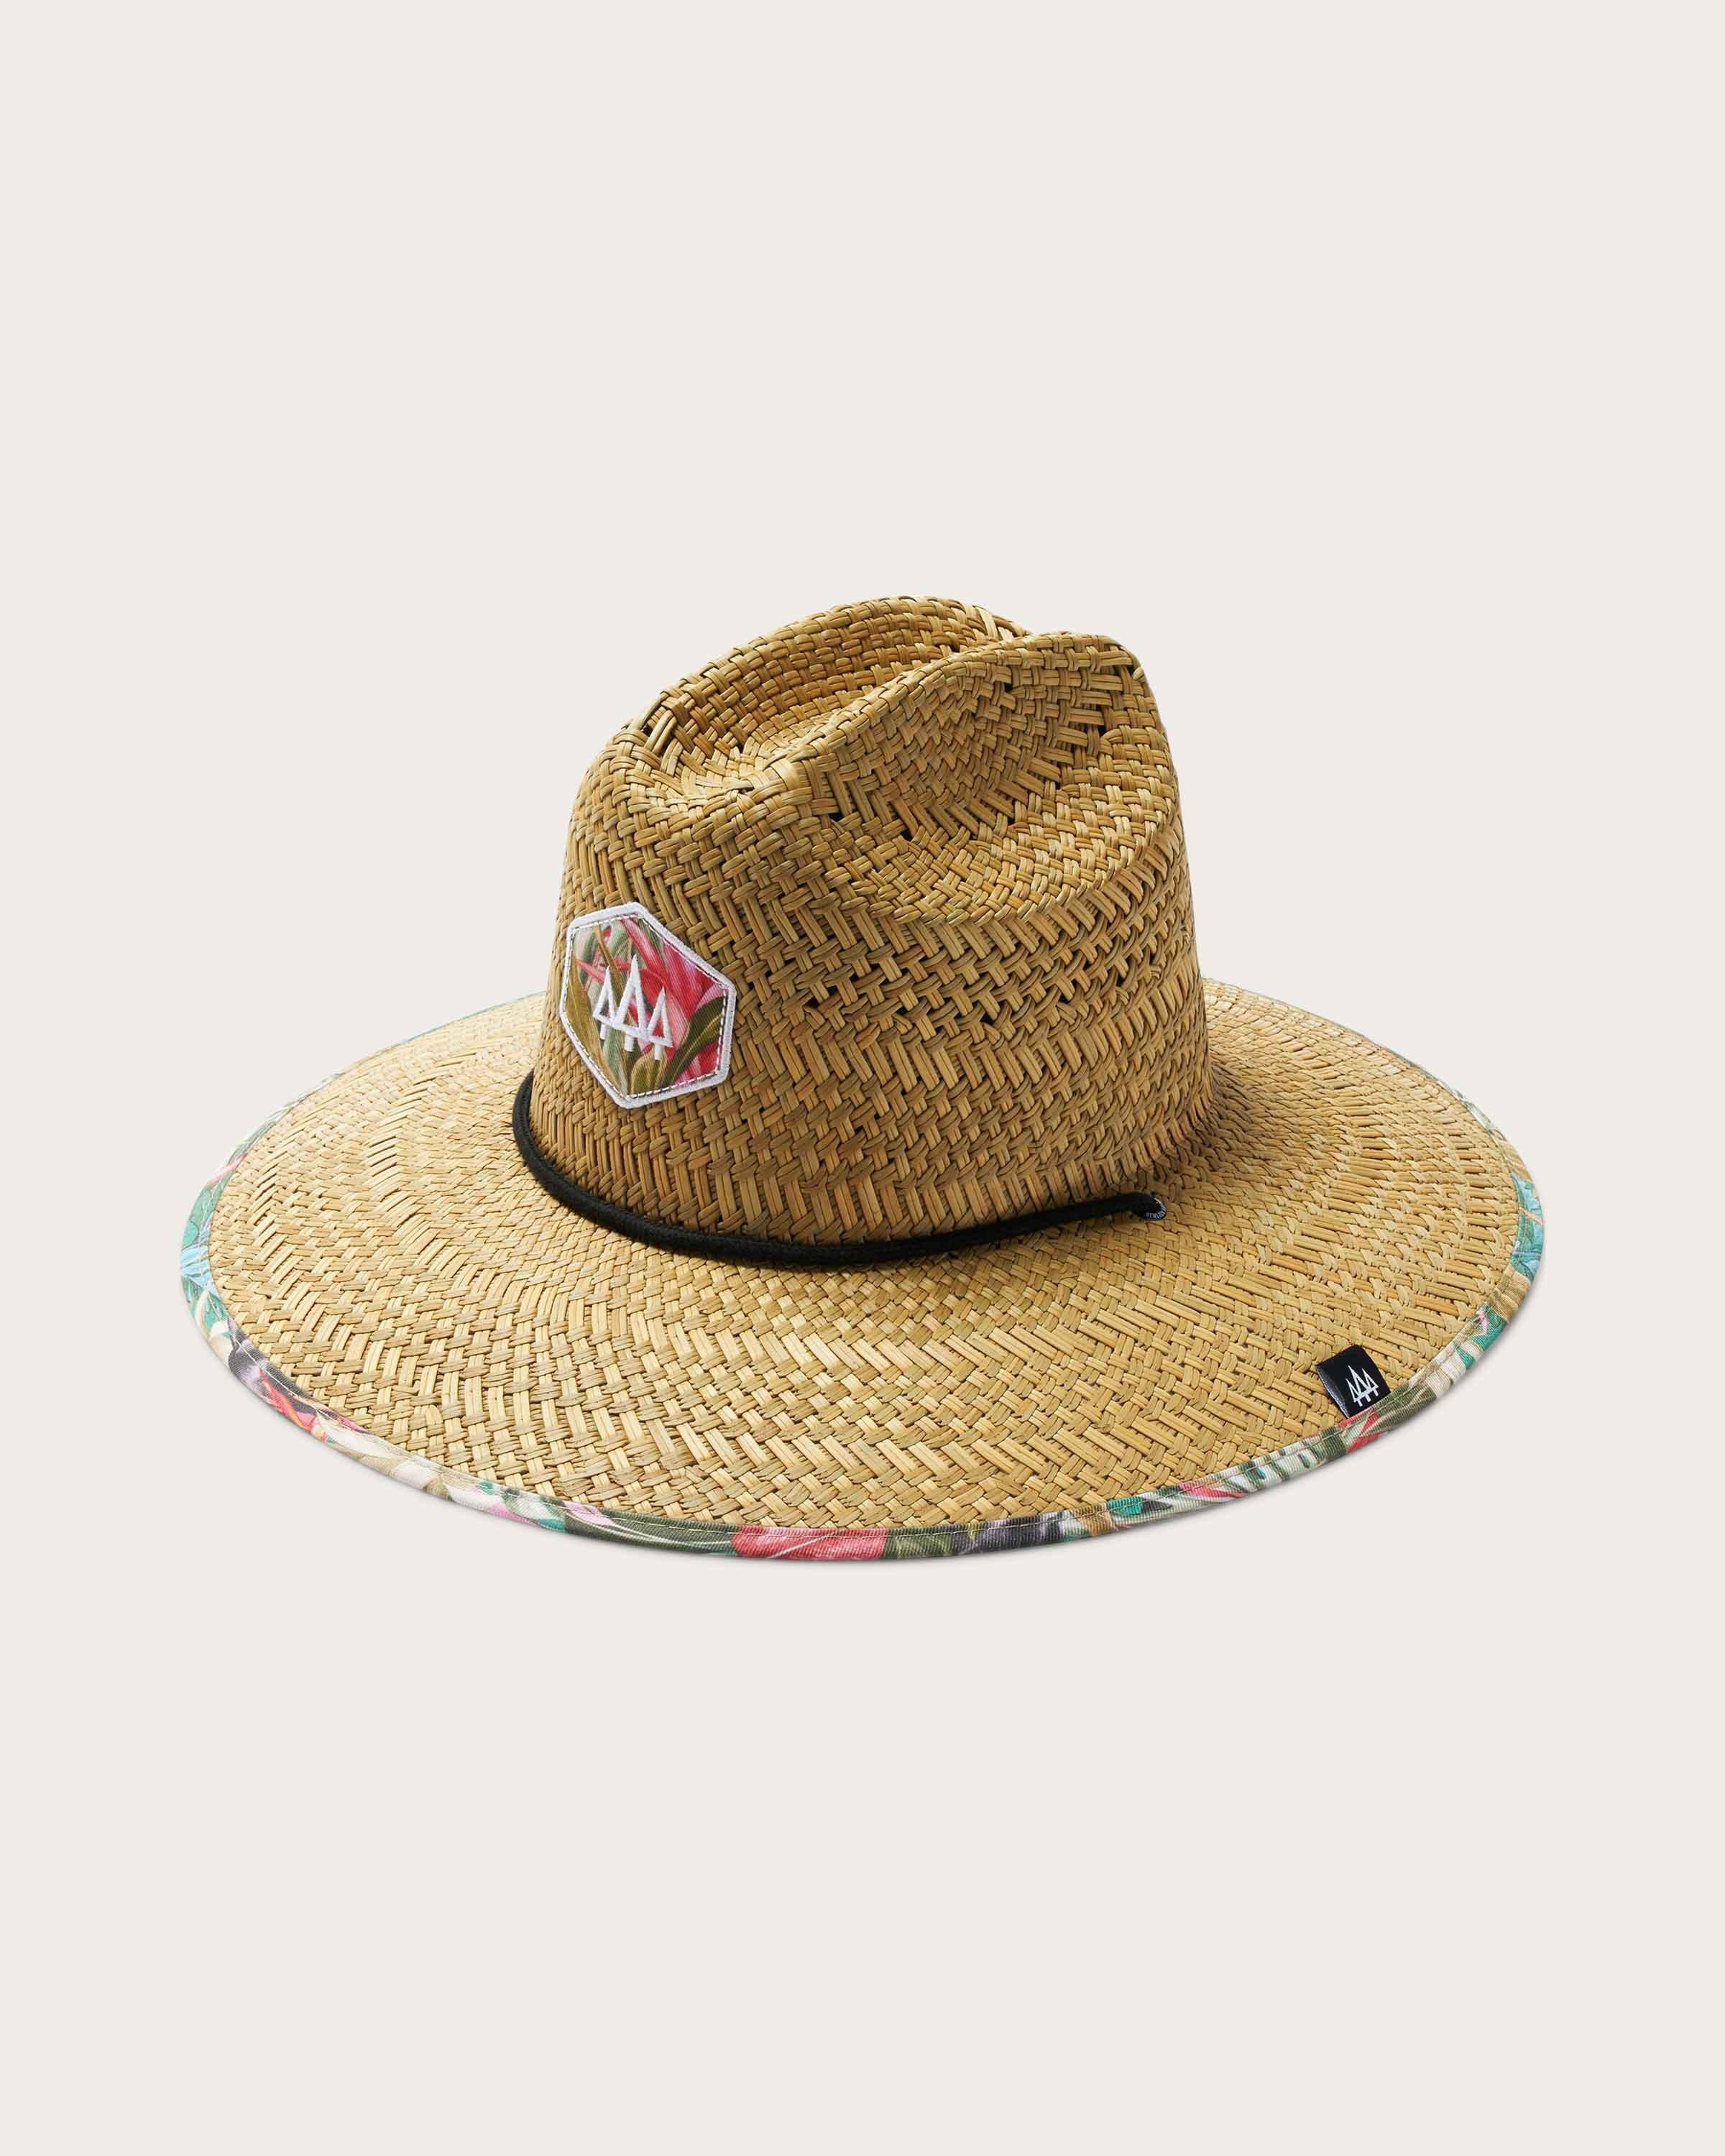 Bombay - undefined - Hemlock Hat Co. Lifeguards - Adults